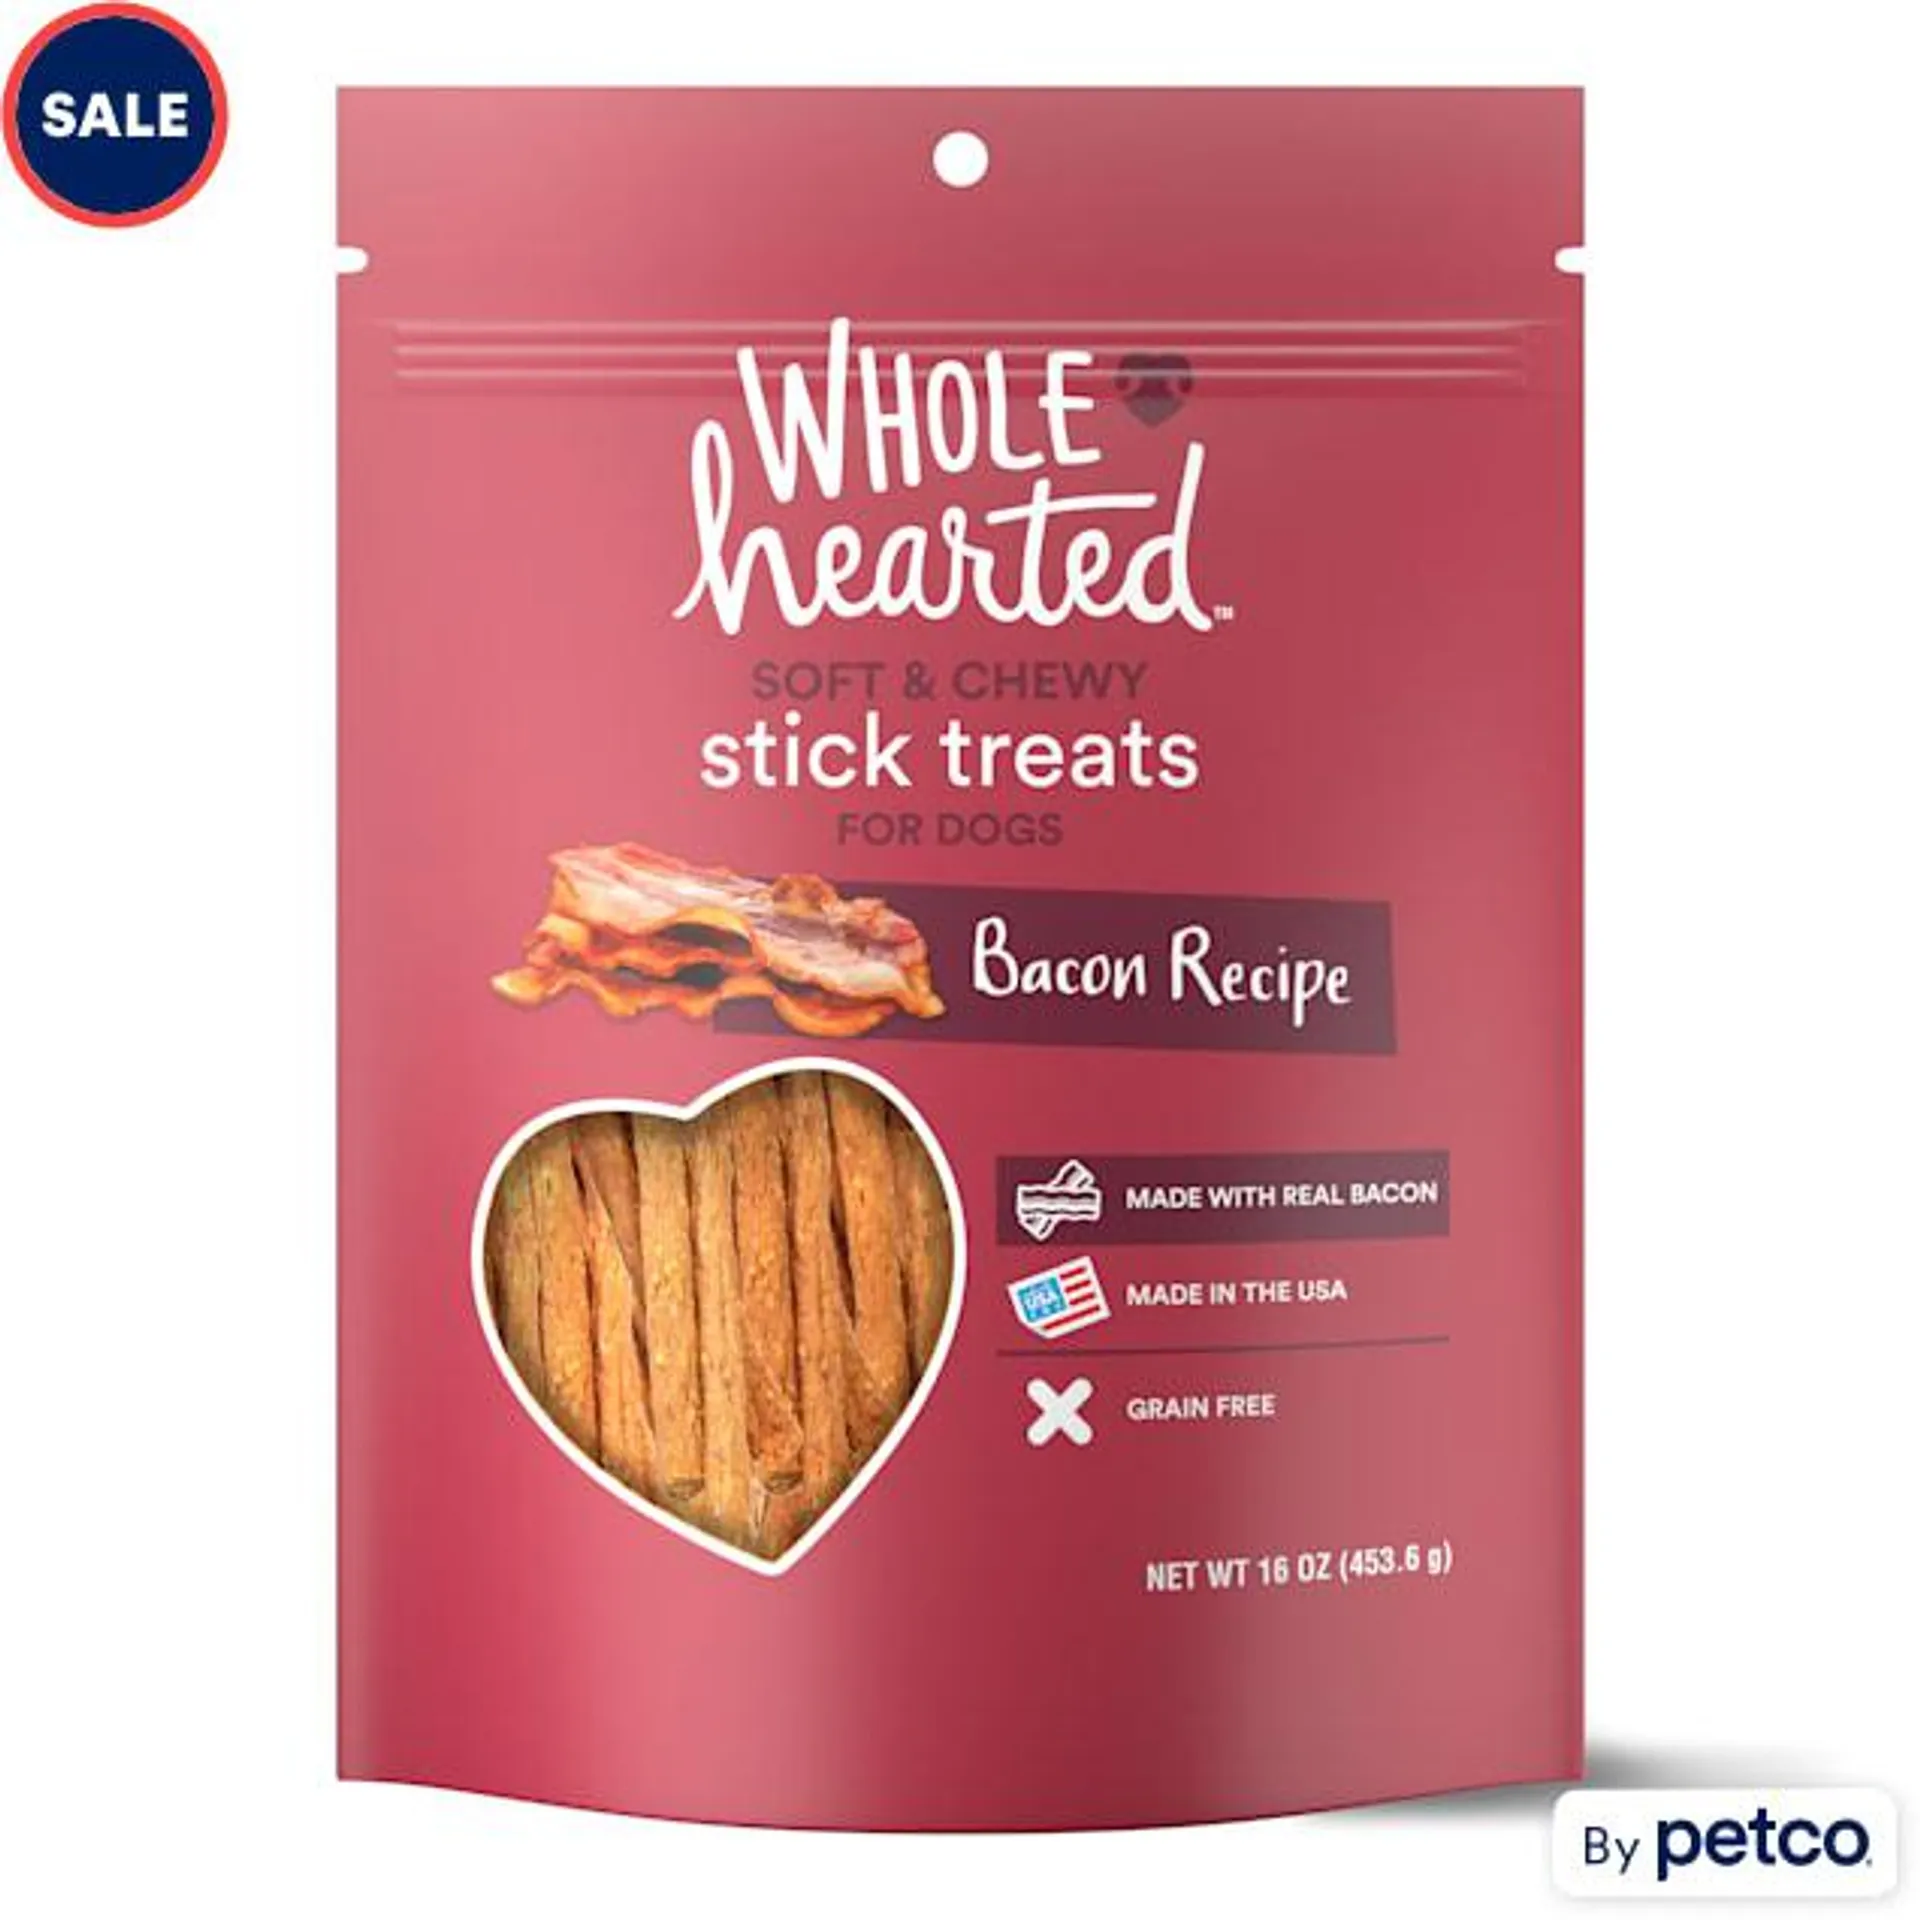 WholeHearted Grain Free Soft and Chewy Bacon Recipe Dog Stick Treats, 16 oz